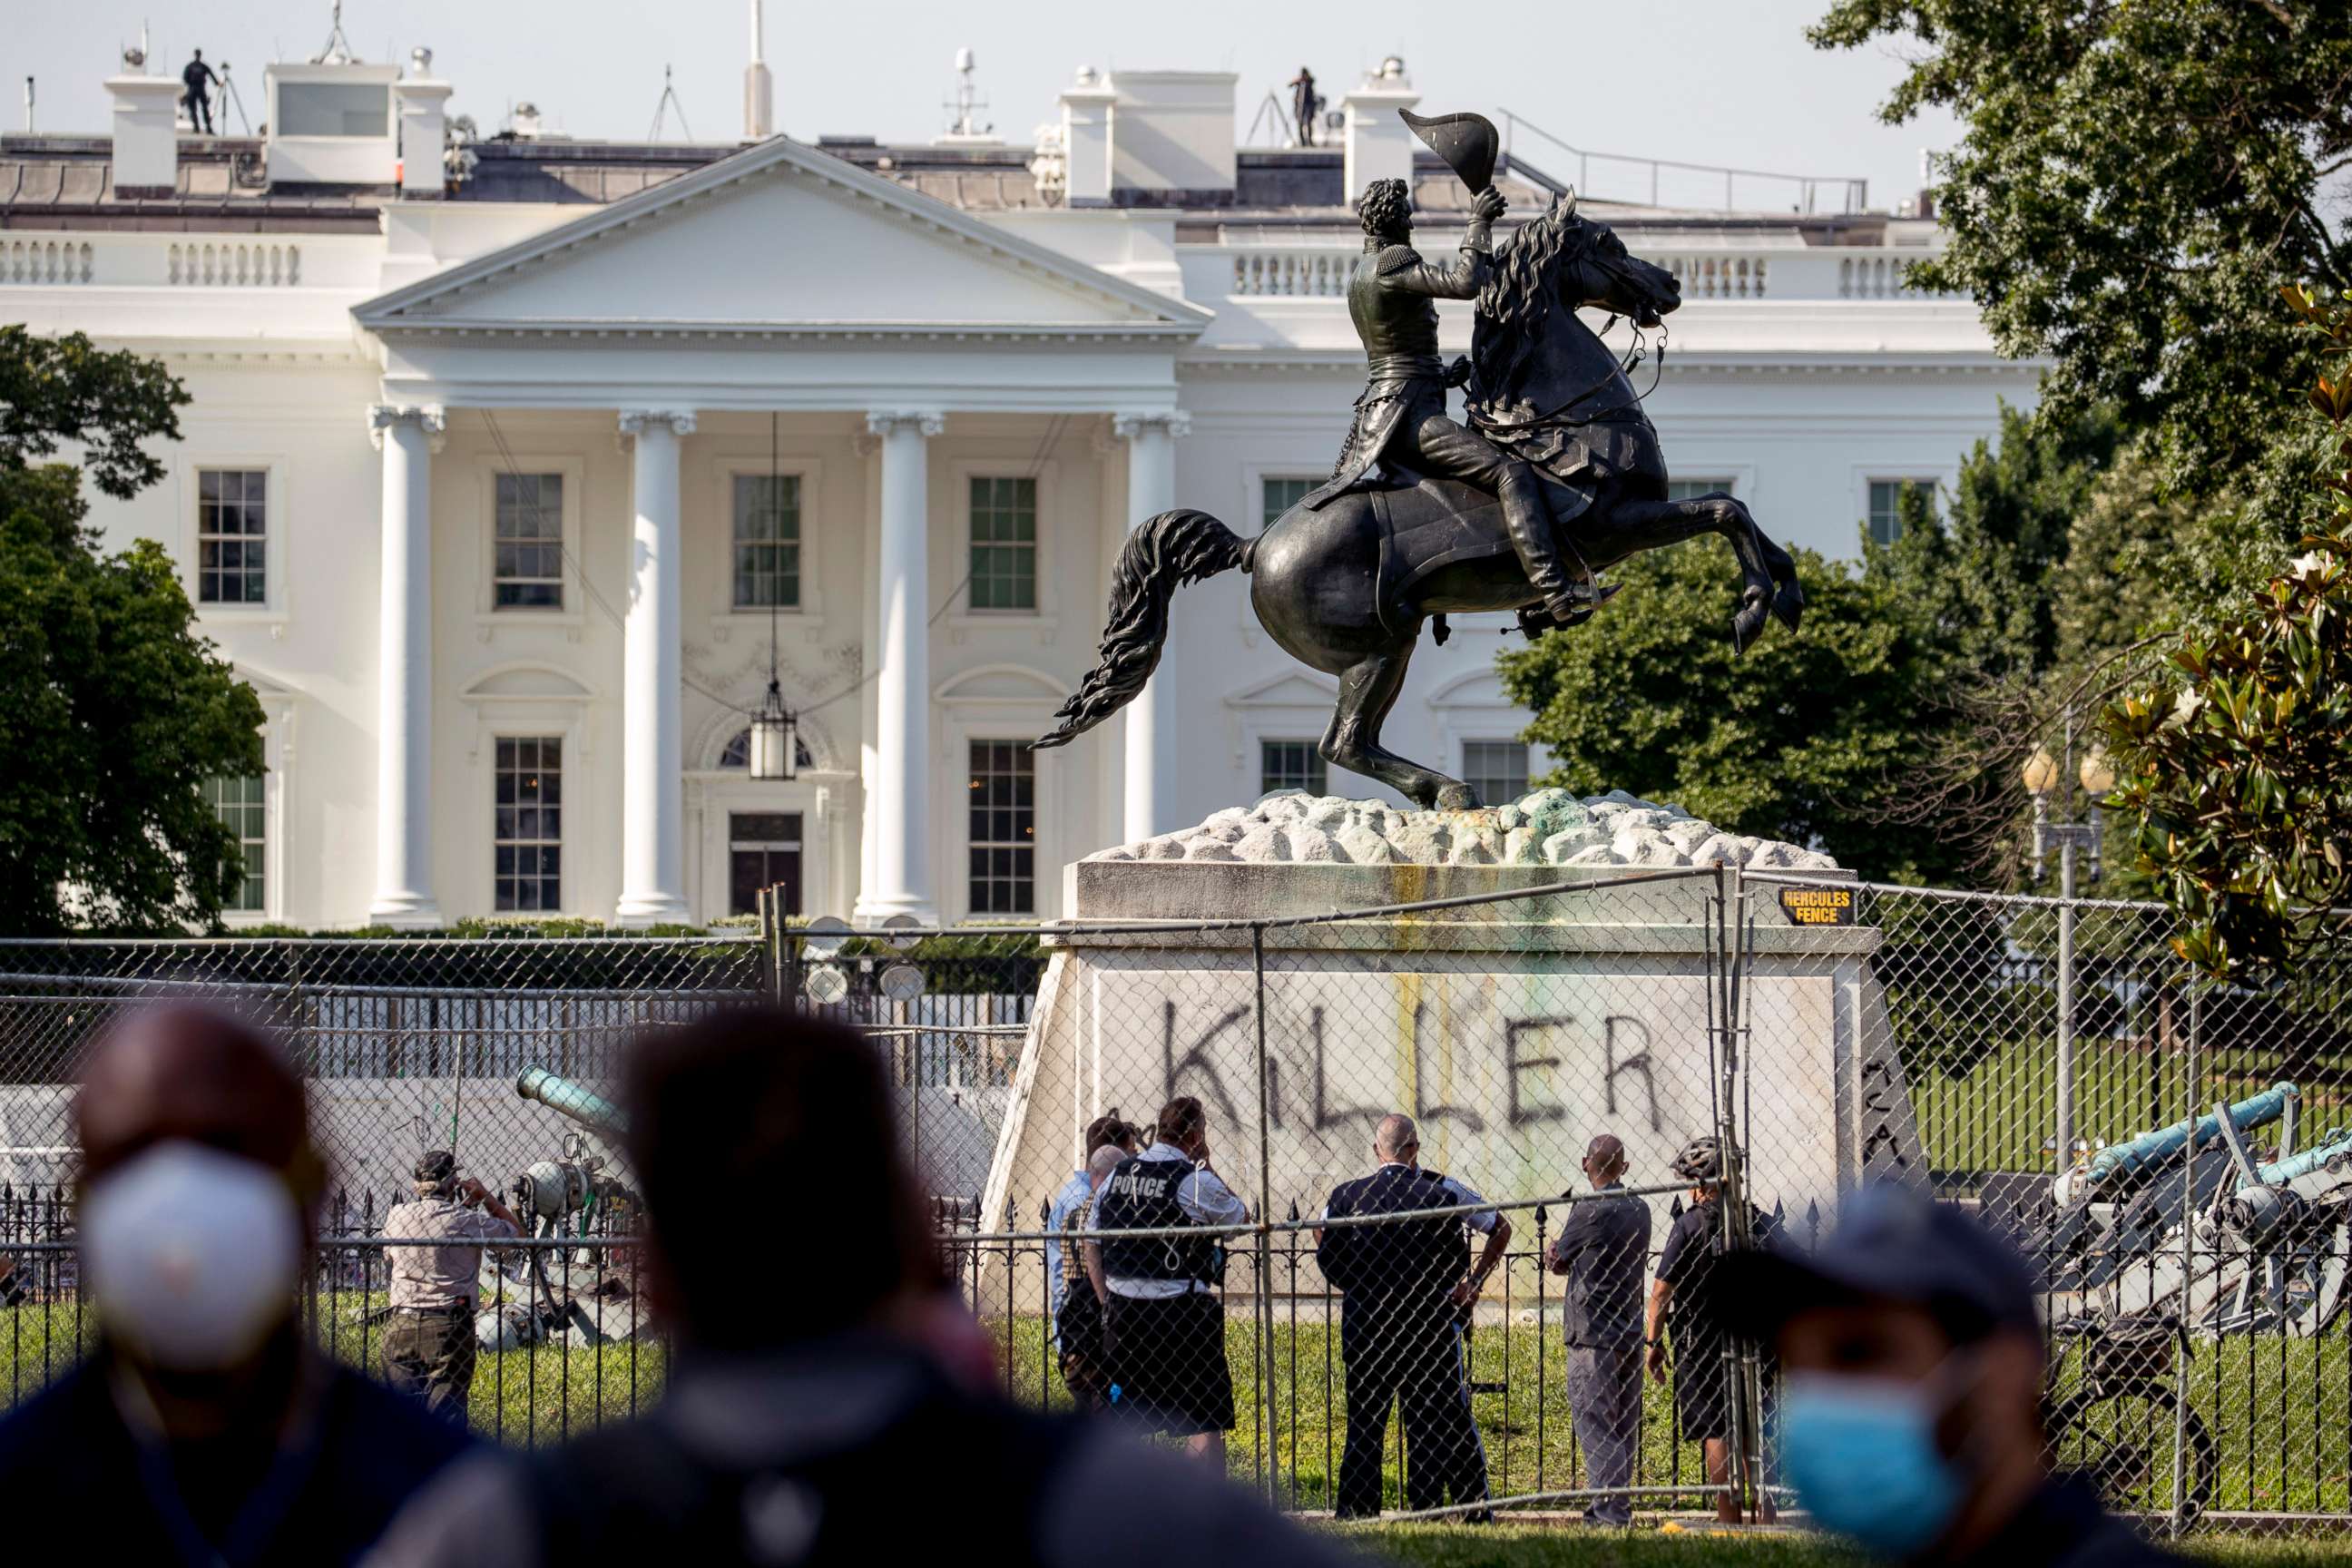 PHOTO: The White House is visible behind a statue of President Andrew Jackson in Lafayette Park, June 23, 2020, in Washington, with the word "Killer" spray painted on its base.